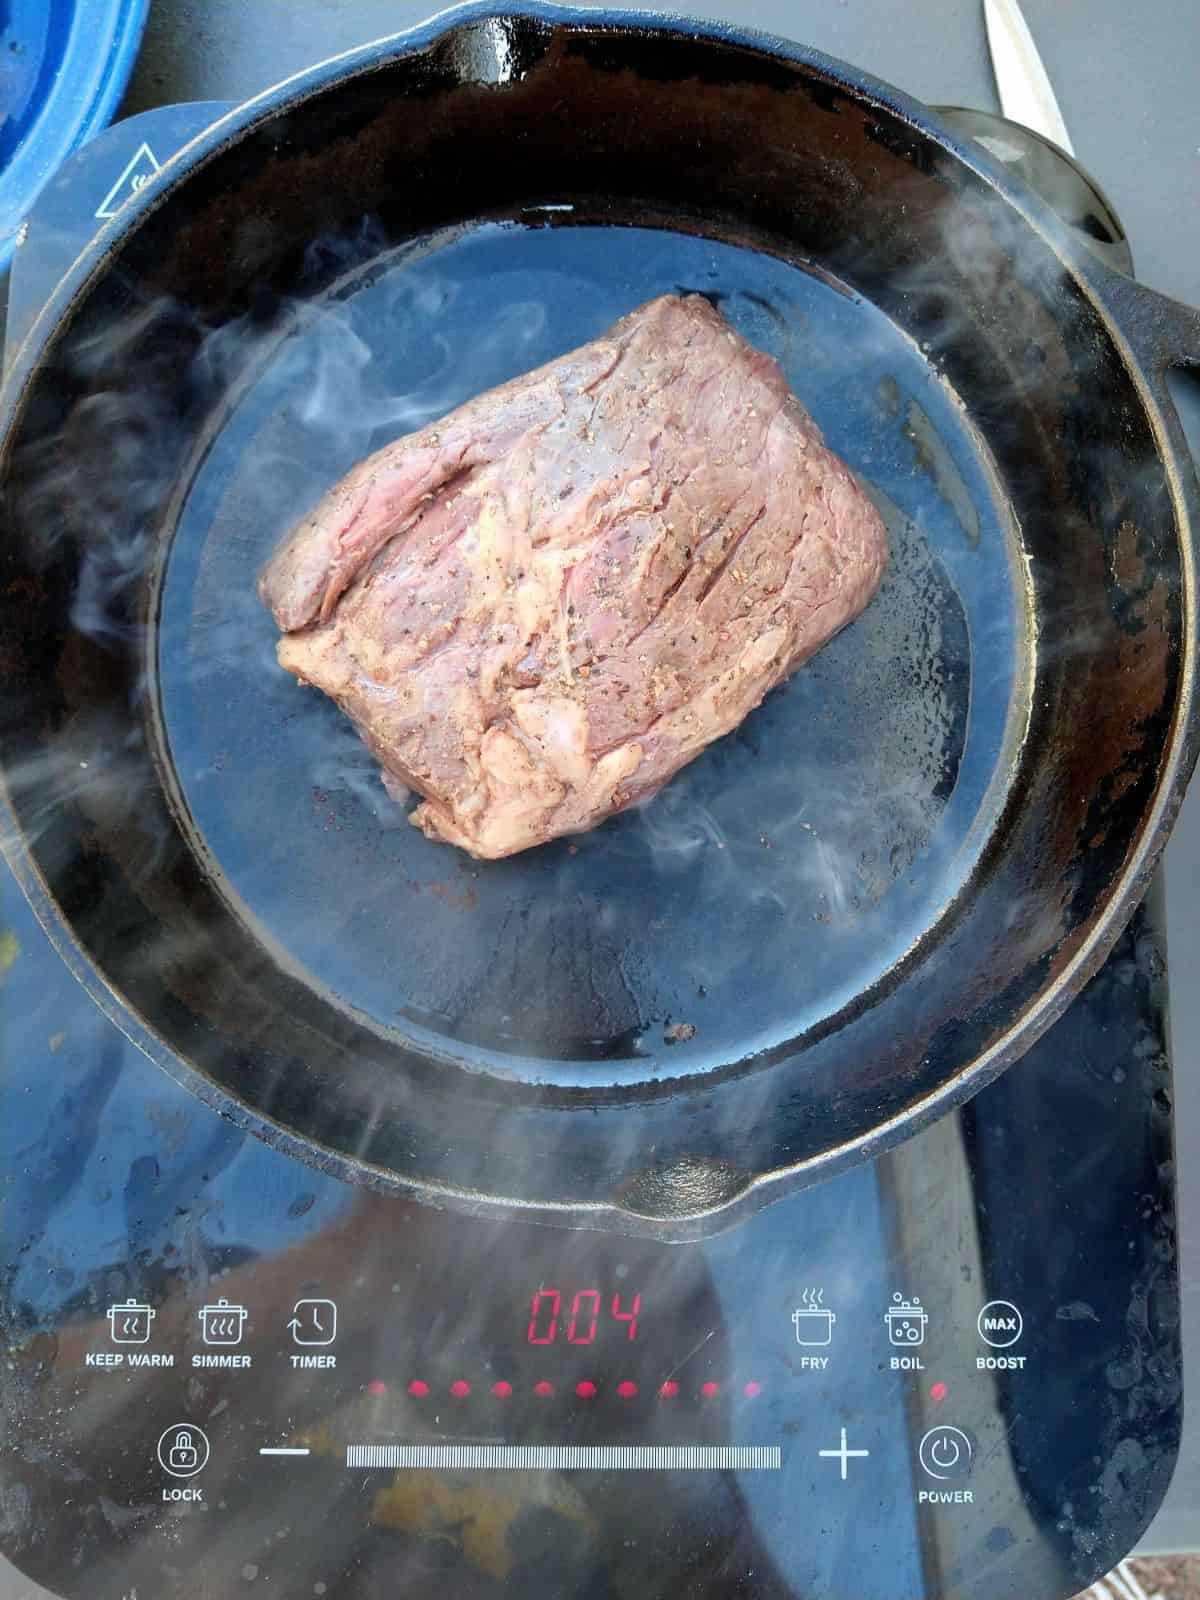 A cast iron skillet on a induction cooktop with a Bavette steak being seared in it. You can see smoke rising from the skillet.